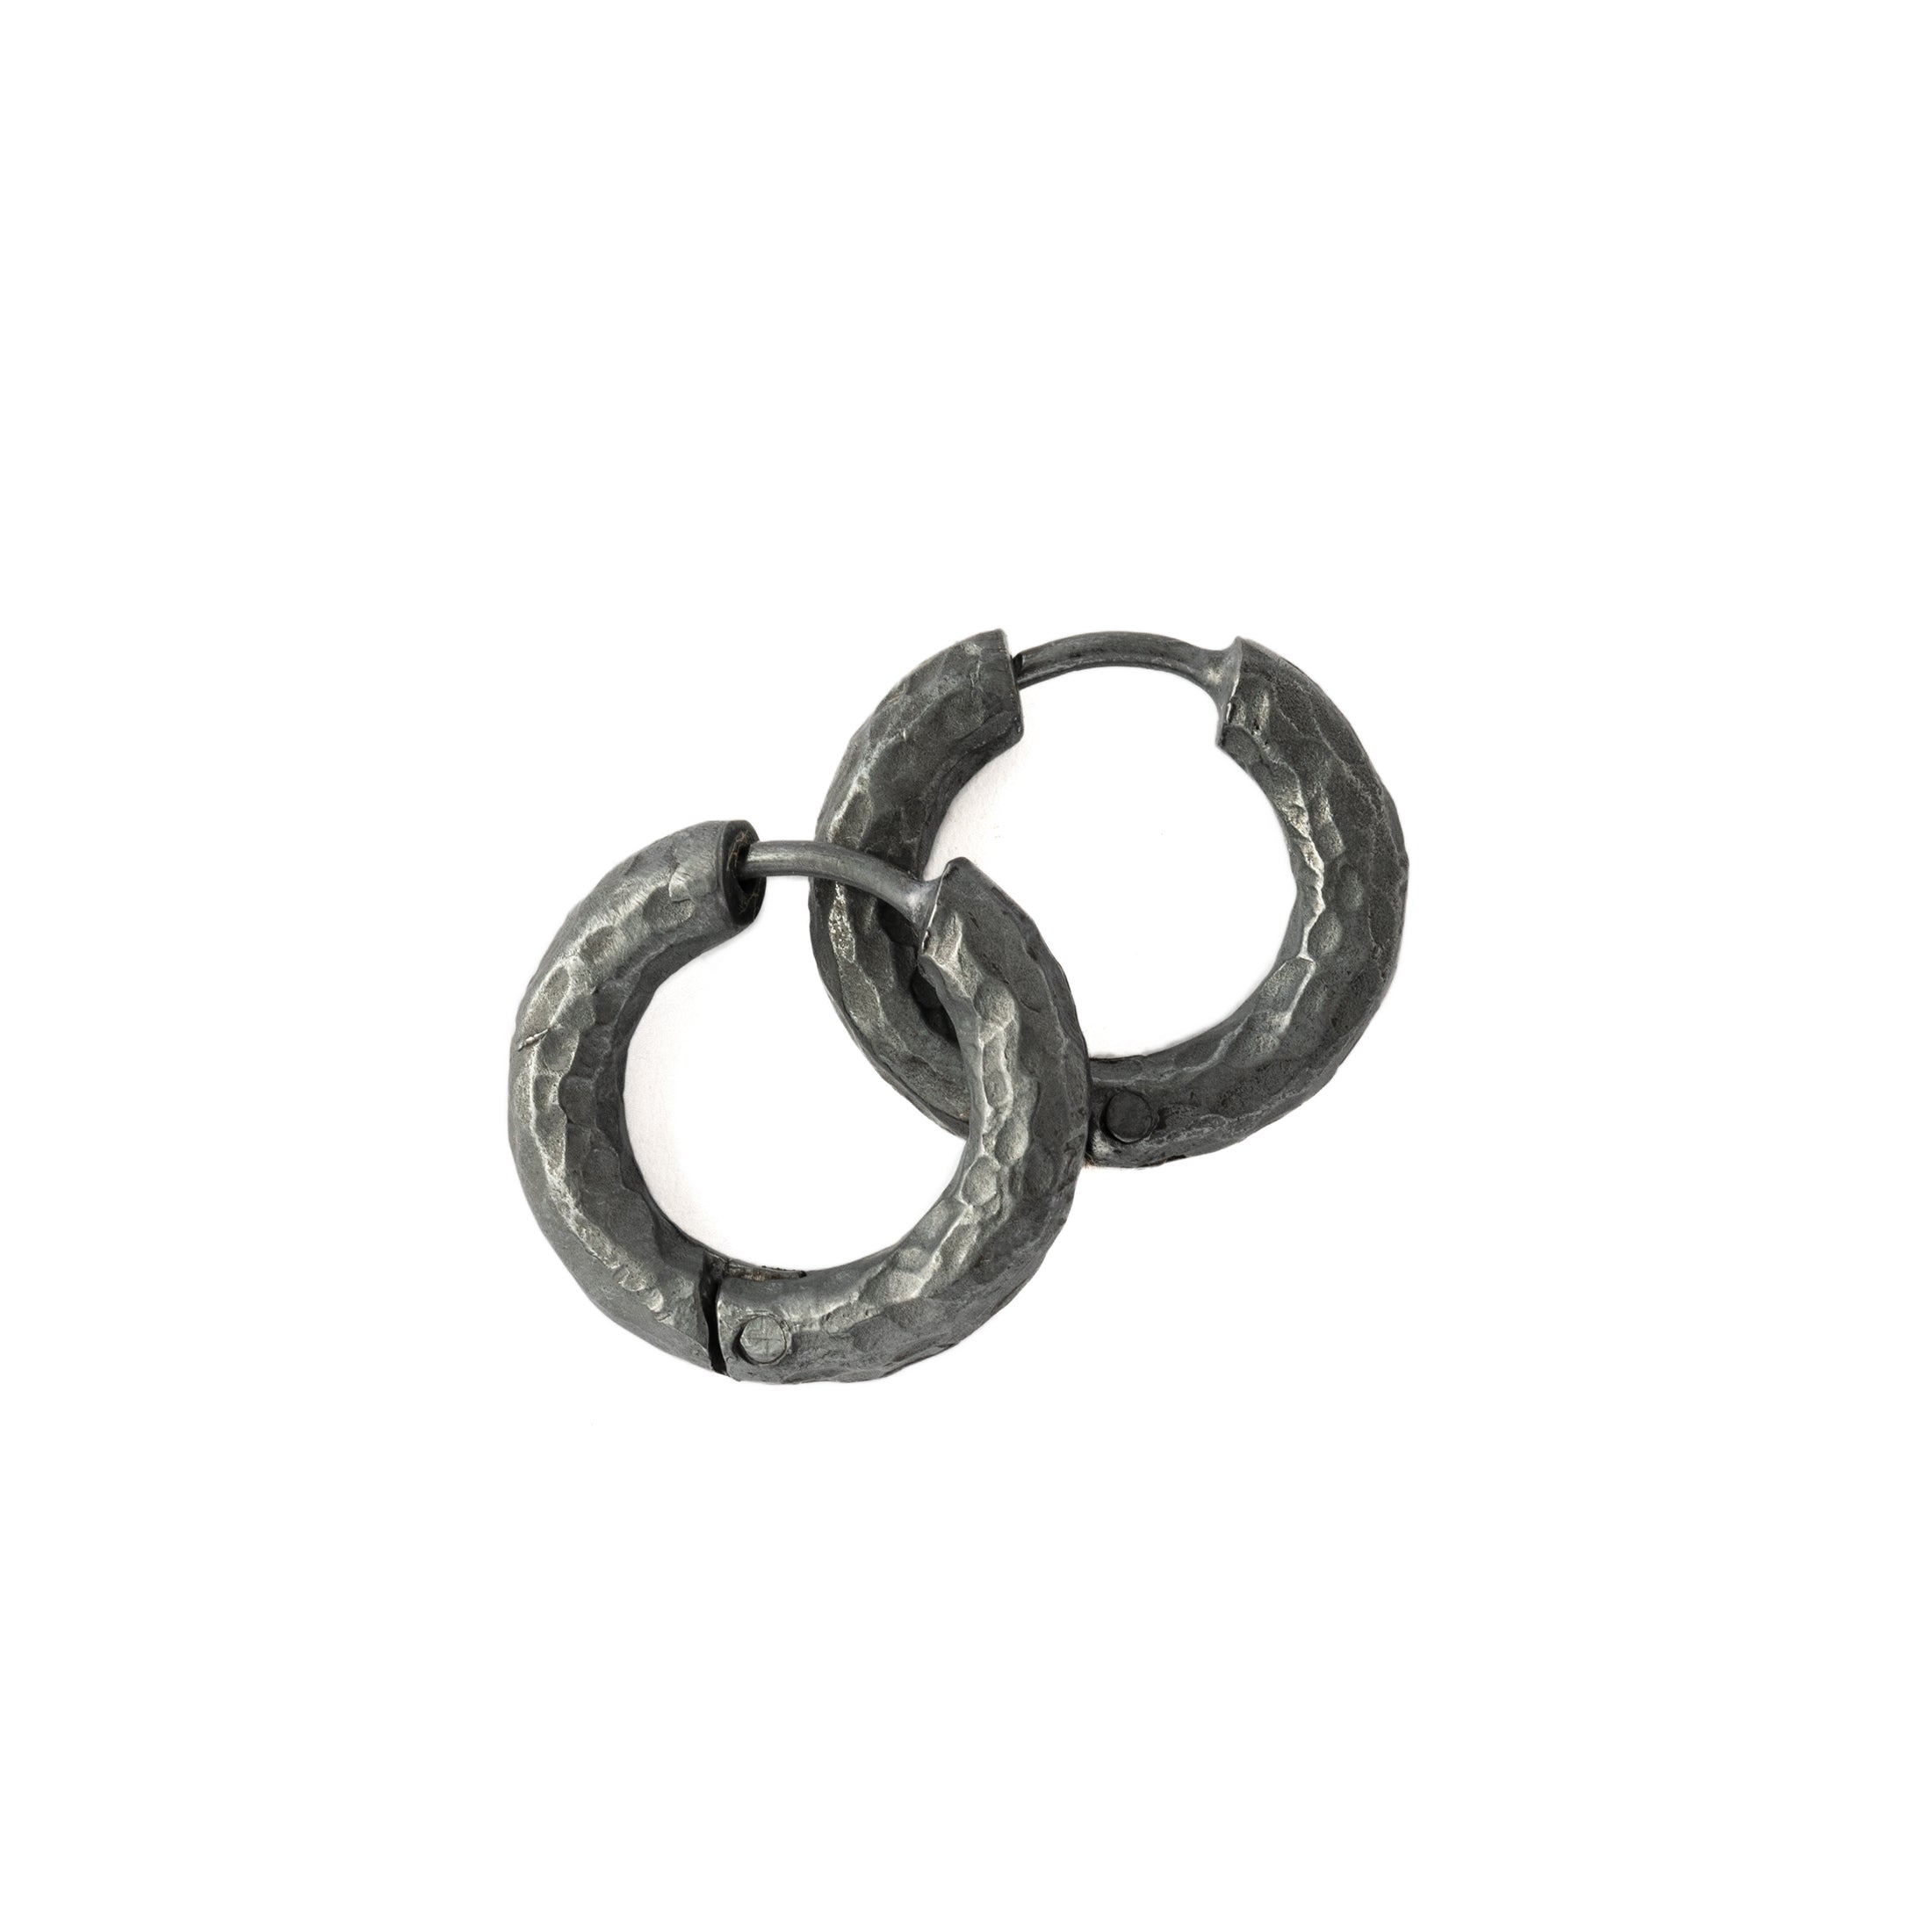 Pair of 18mm Hammered Black Silver Clicker Hoops